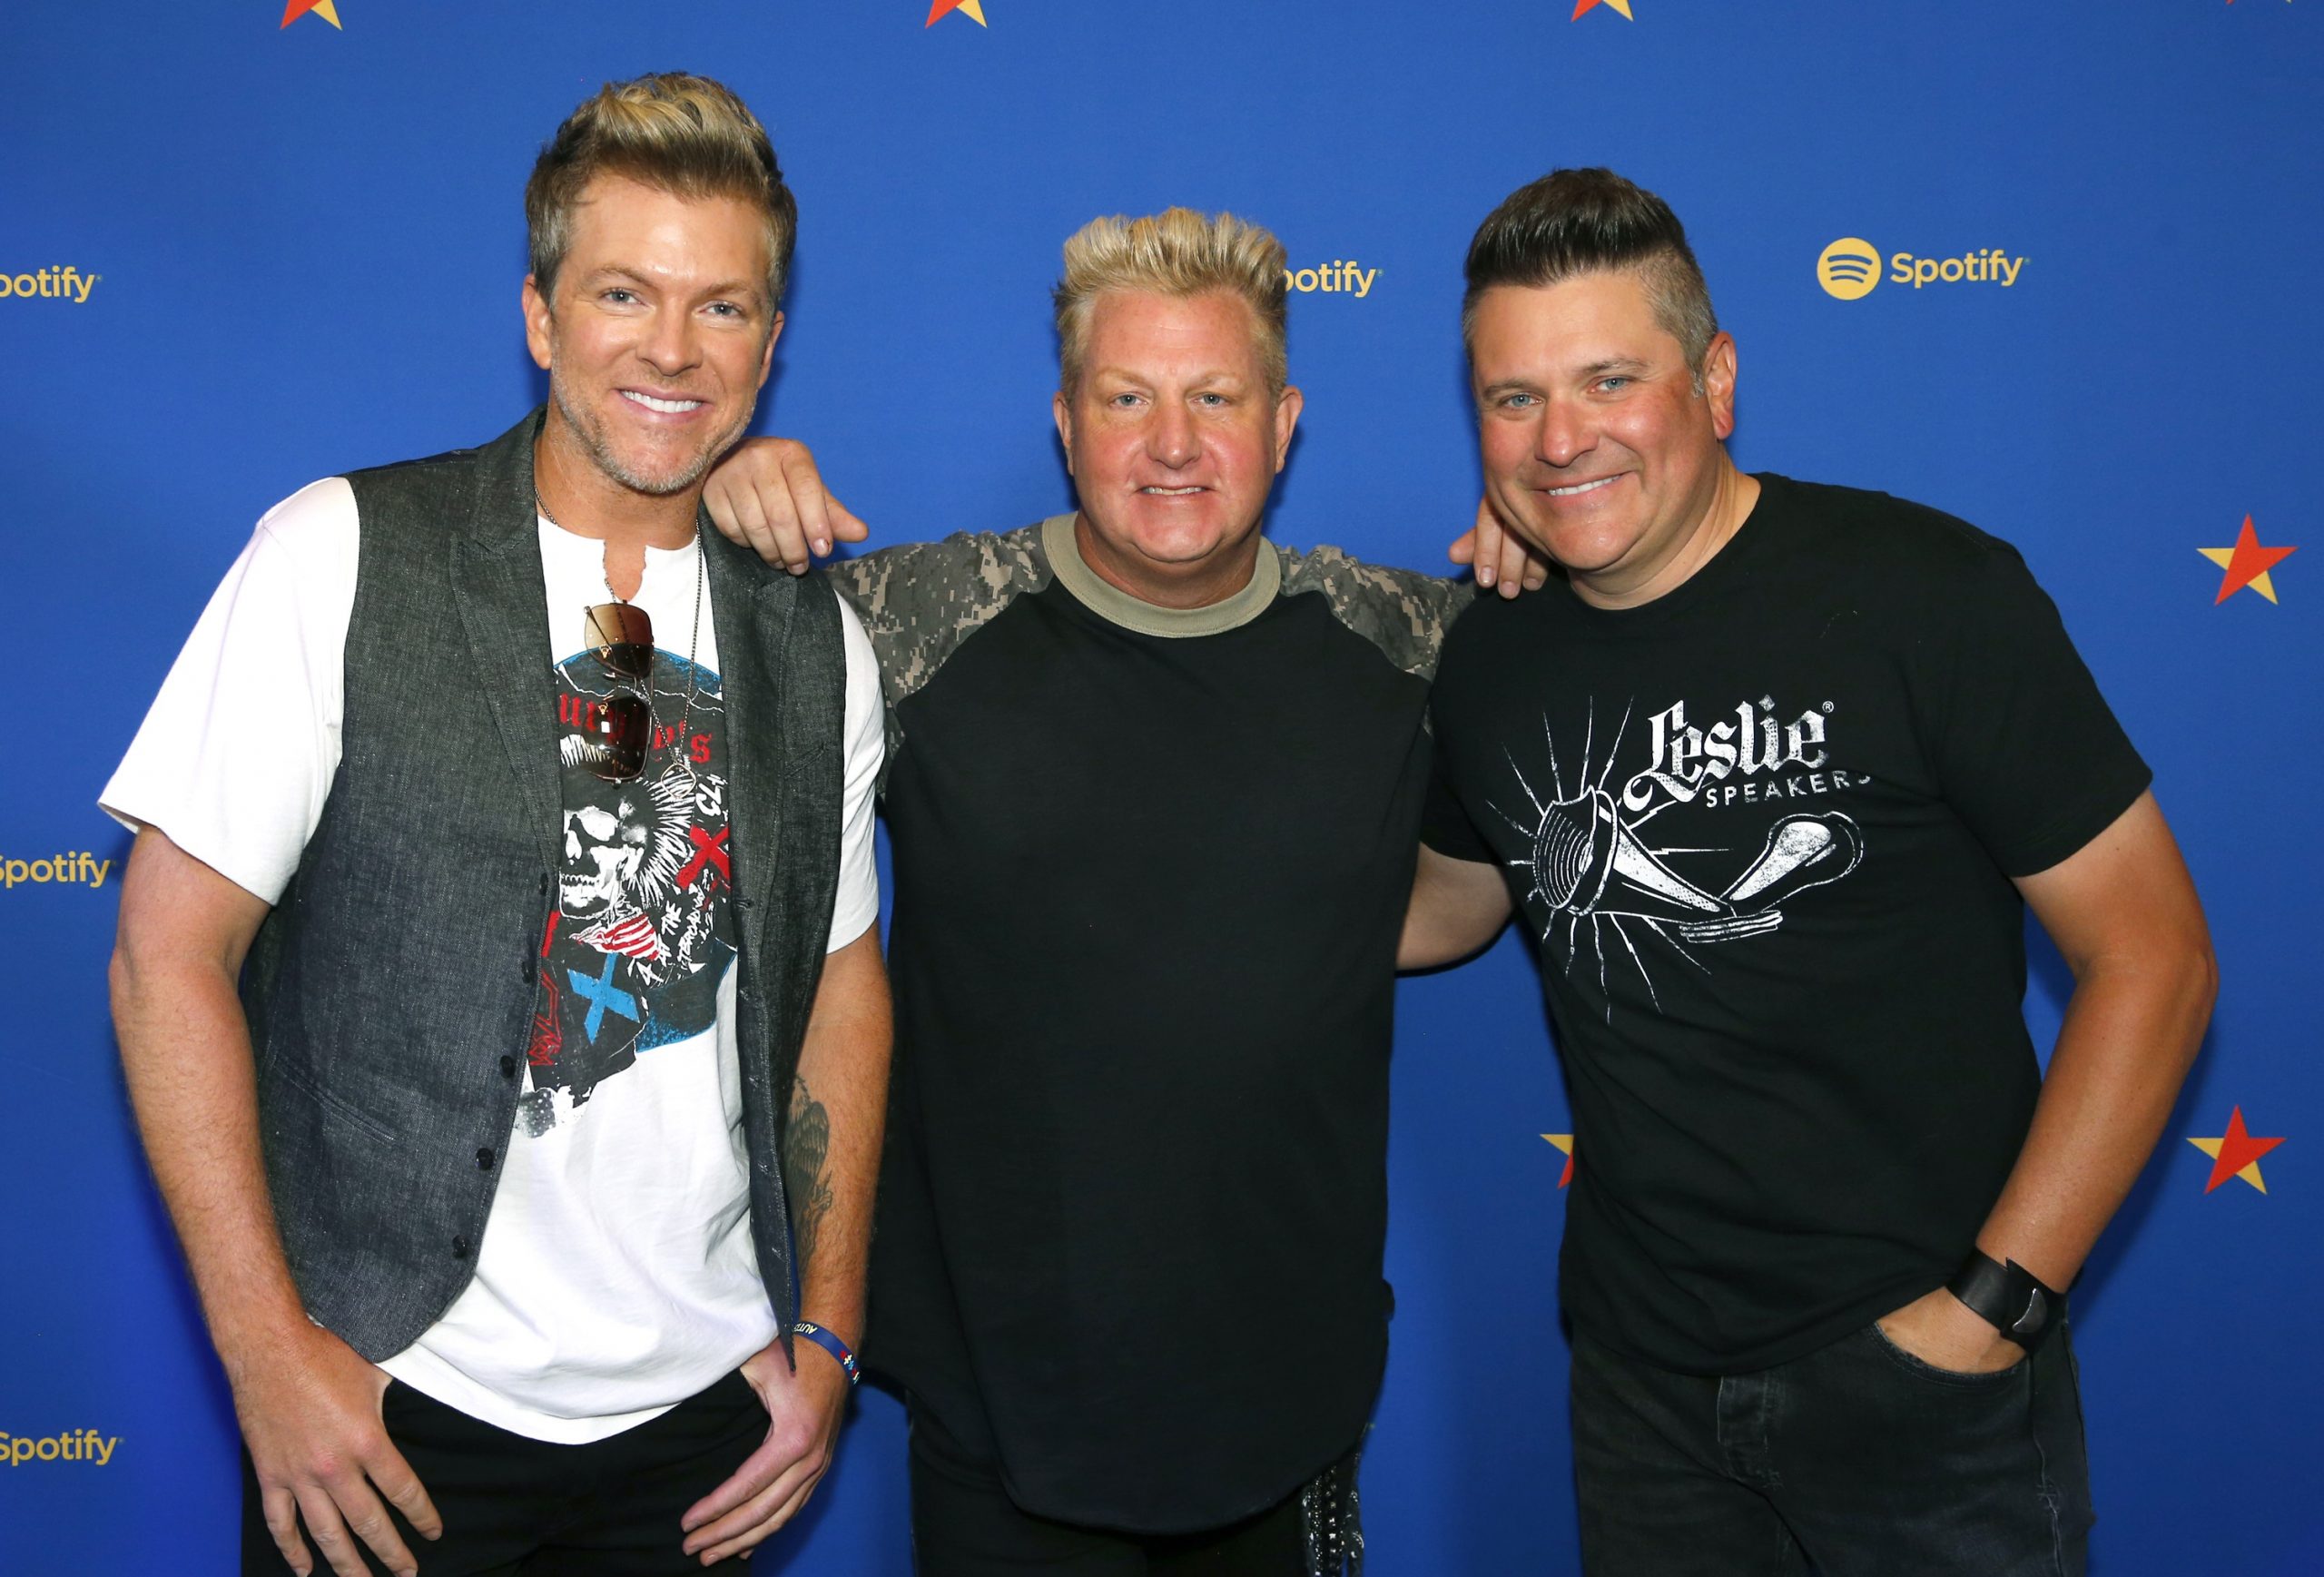 Rascal Flatts Shares Thoughts On Staying Relevant, Touring and Give